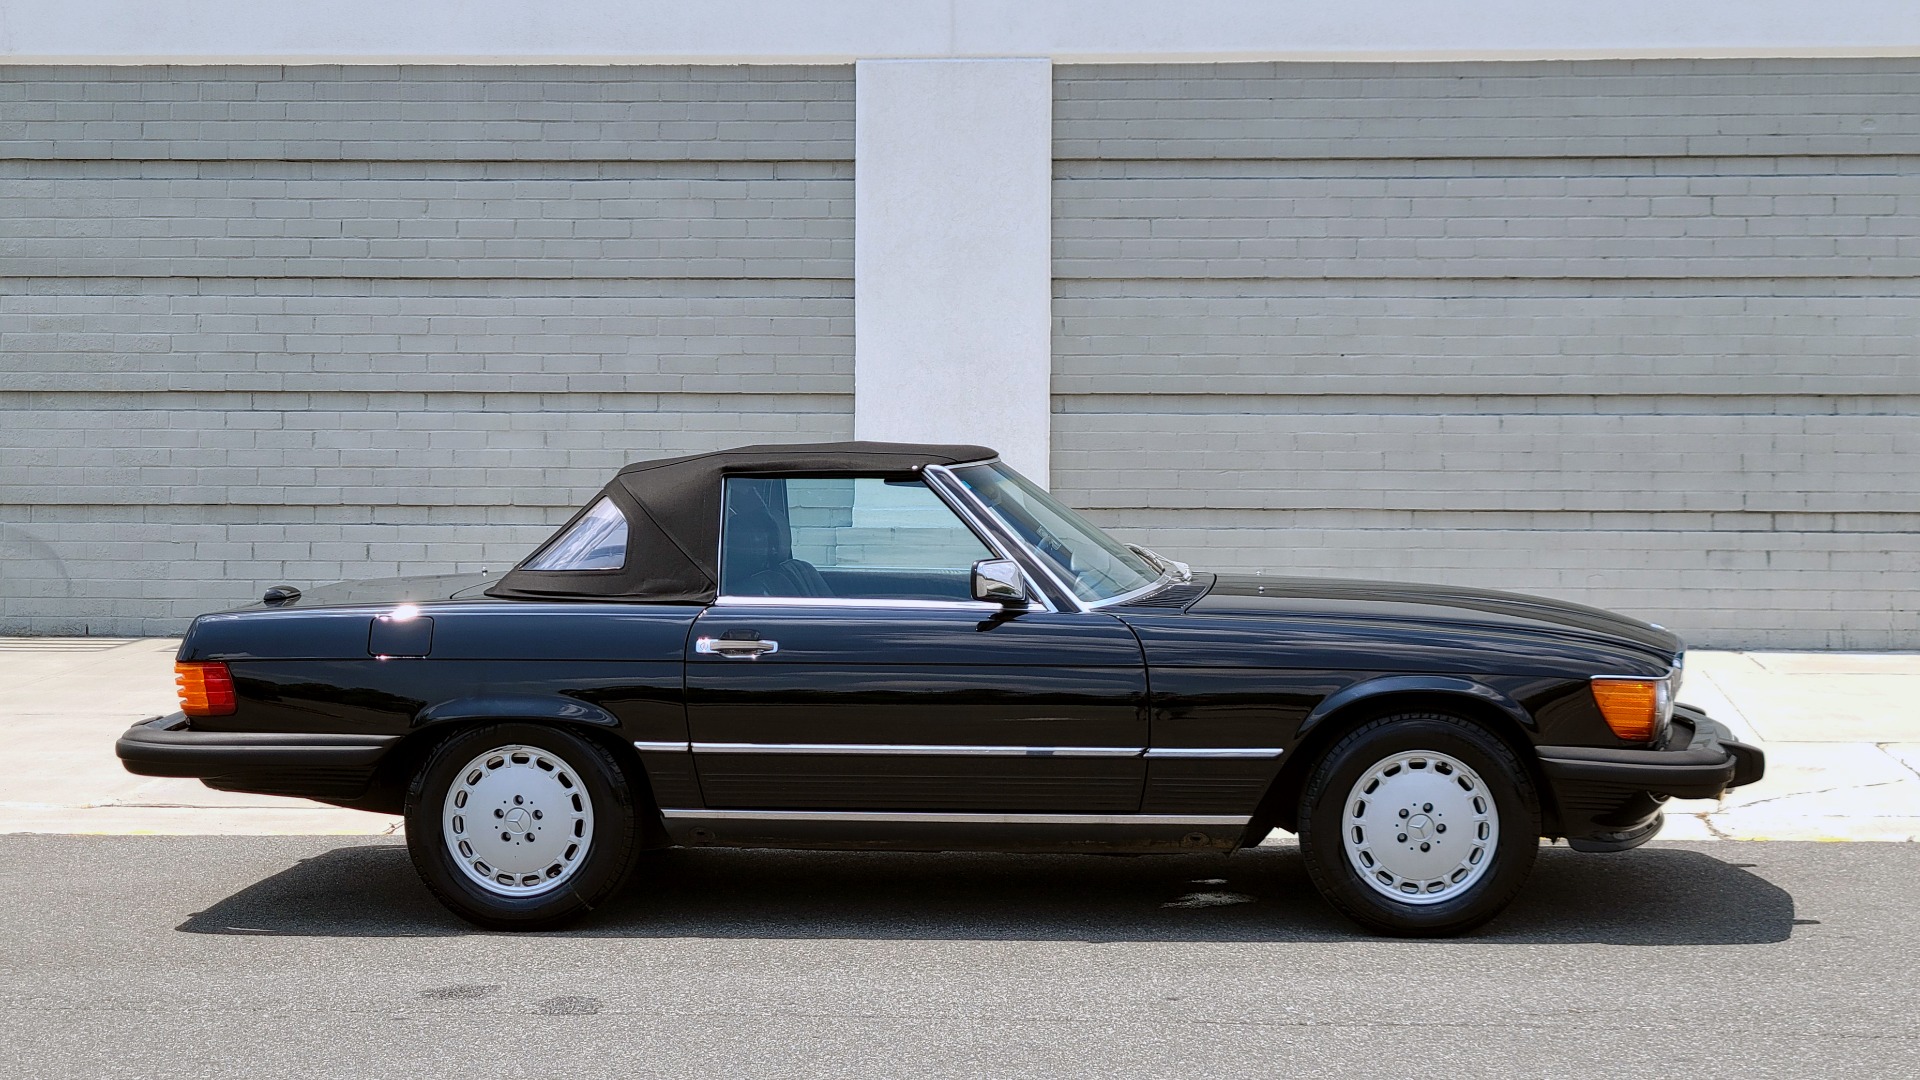 Used 1989 Mercedes-Benz 560 SERIES 560SL ROADSTER / 5.6L V8 227HP / AUTOMATIC TRANS for sale $24,999 at Formula Imports in Charlotte NC 28227 8